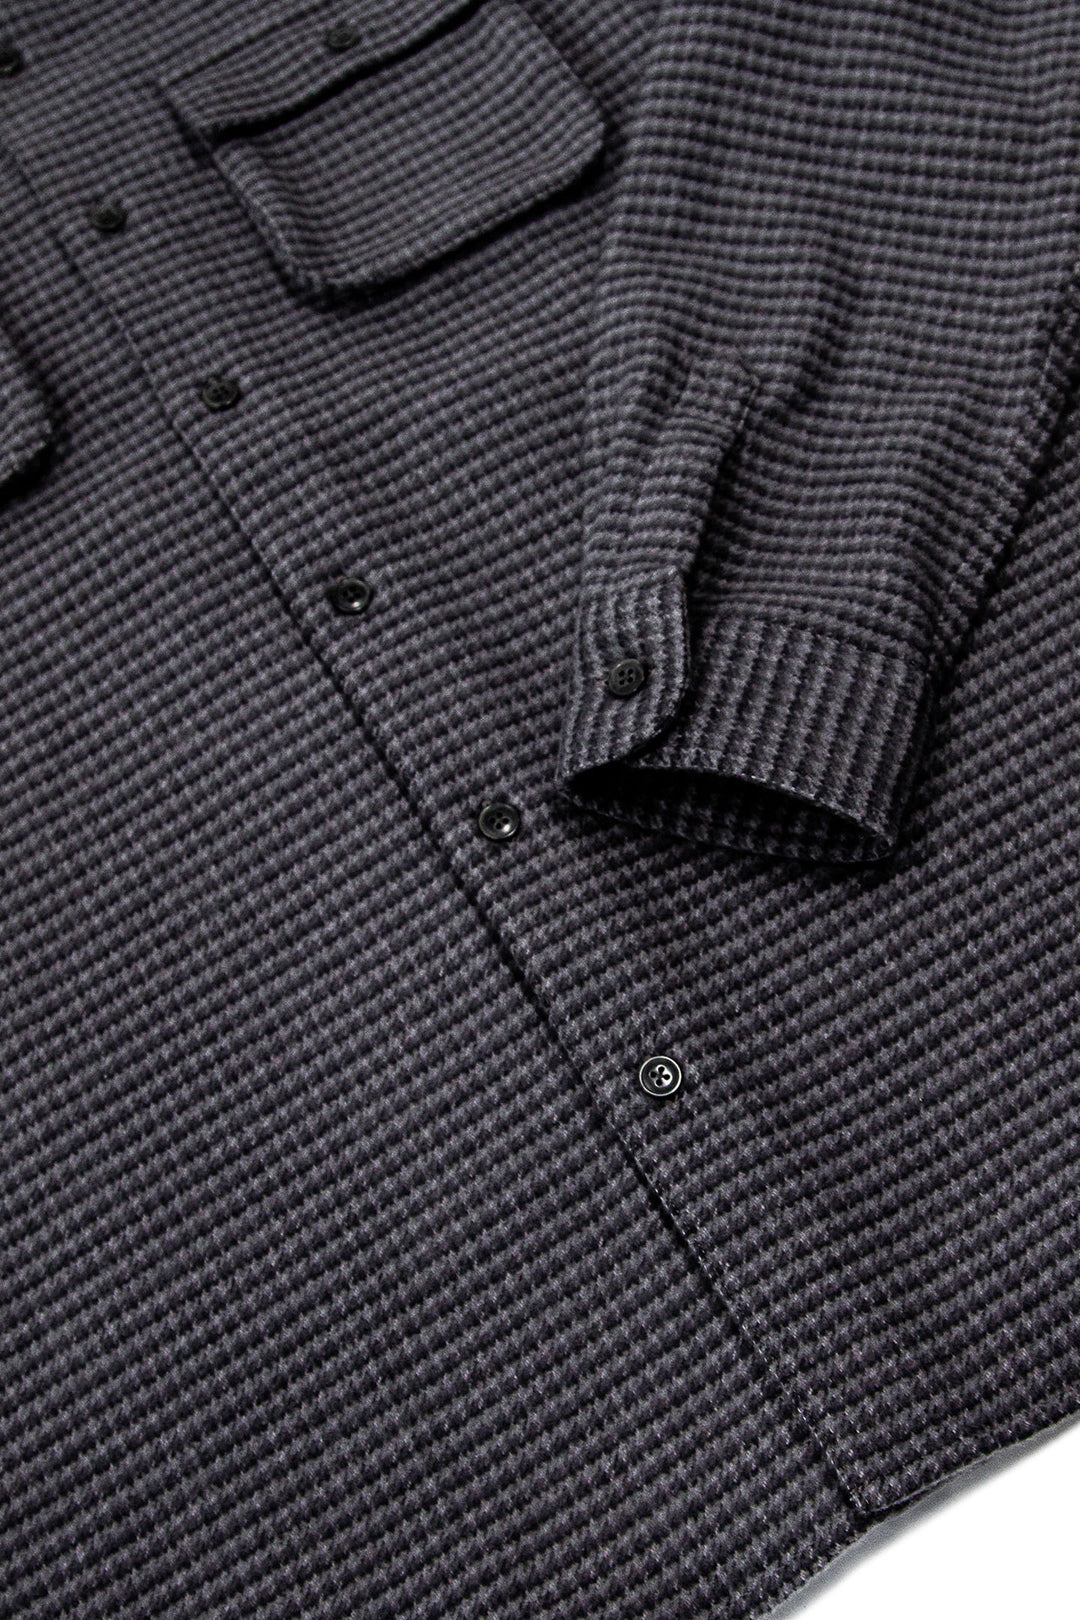 Relaxed fitting charcoal grey flannel shirt for men by MuskOx Flannels, made with 100% heavyweight cotton